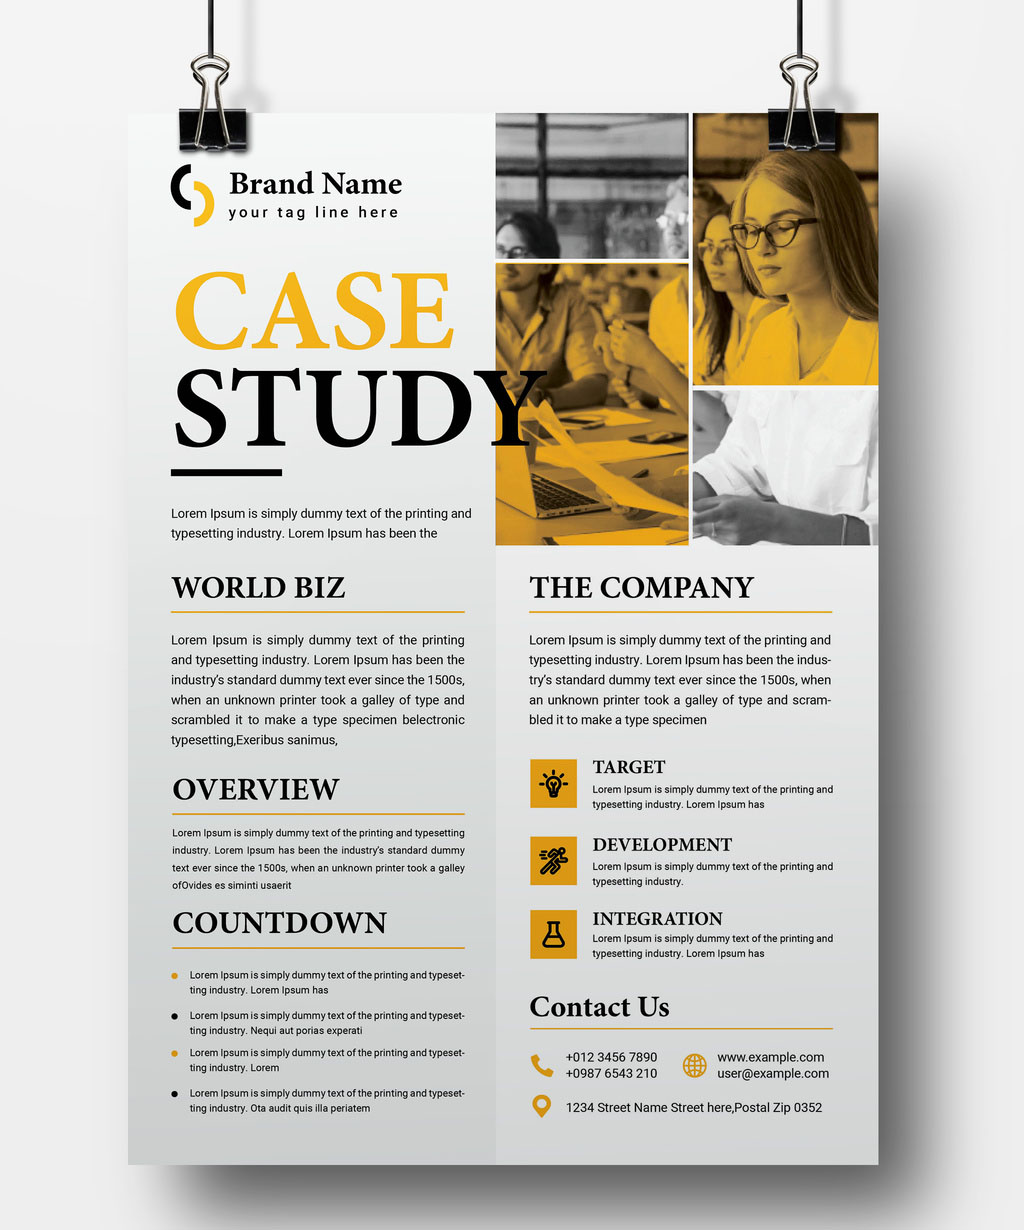 Case Study Layout with Yellow Accents